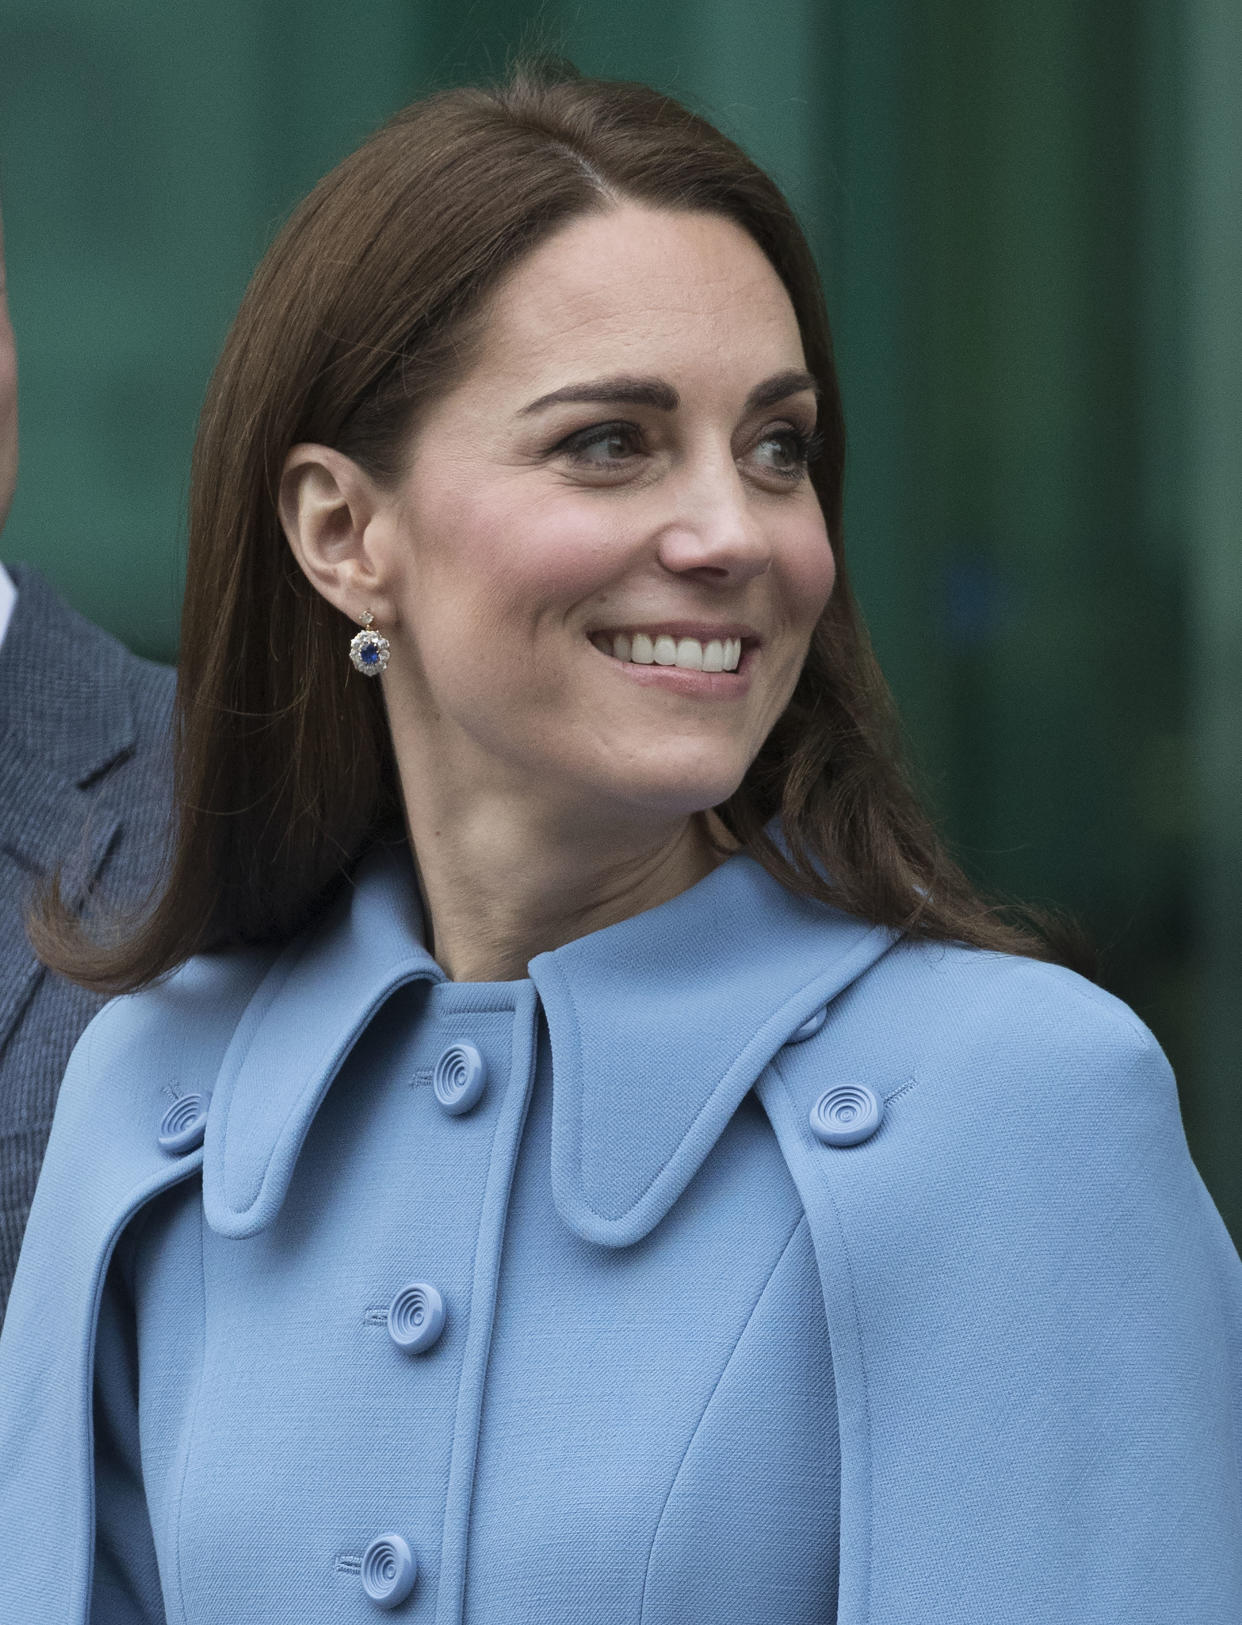 Kate Middleton received her first dose of the COVID-19 vaccine. (Photo: Stephen Lock - Pool/Getty Images)